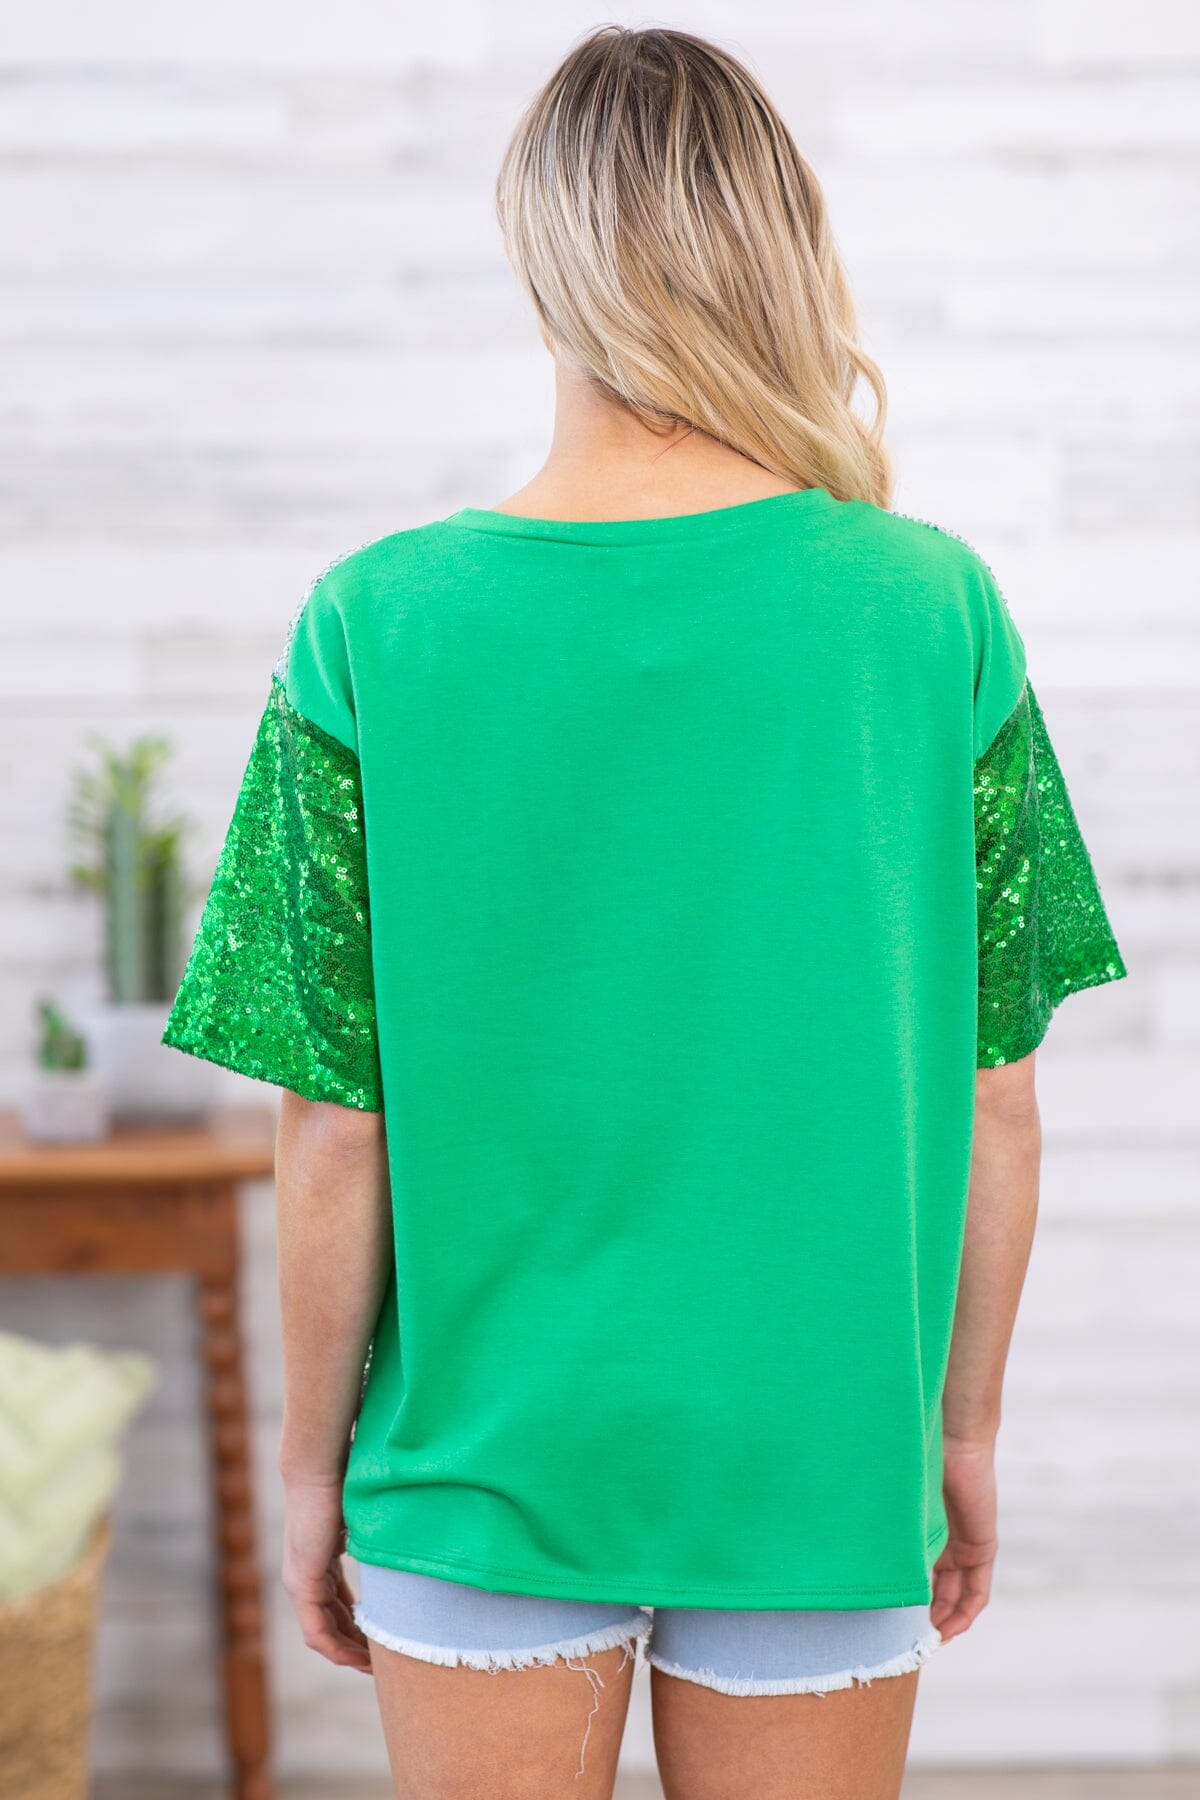 Jade and Sage Sequin Clover Top - Filly Flair